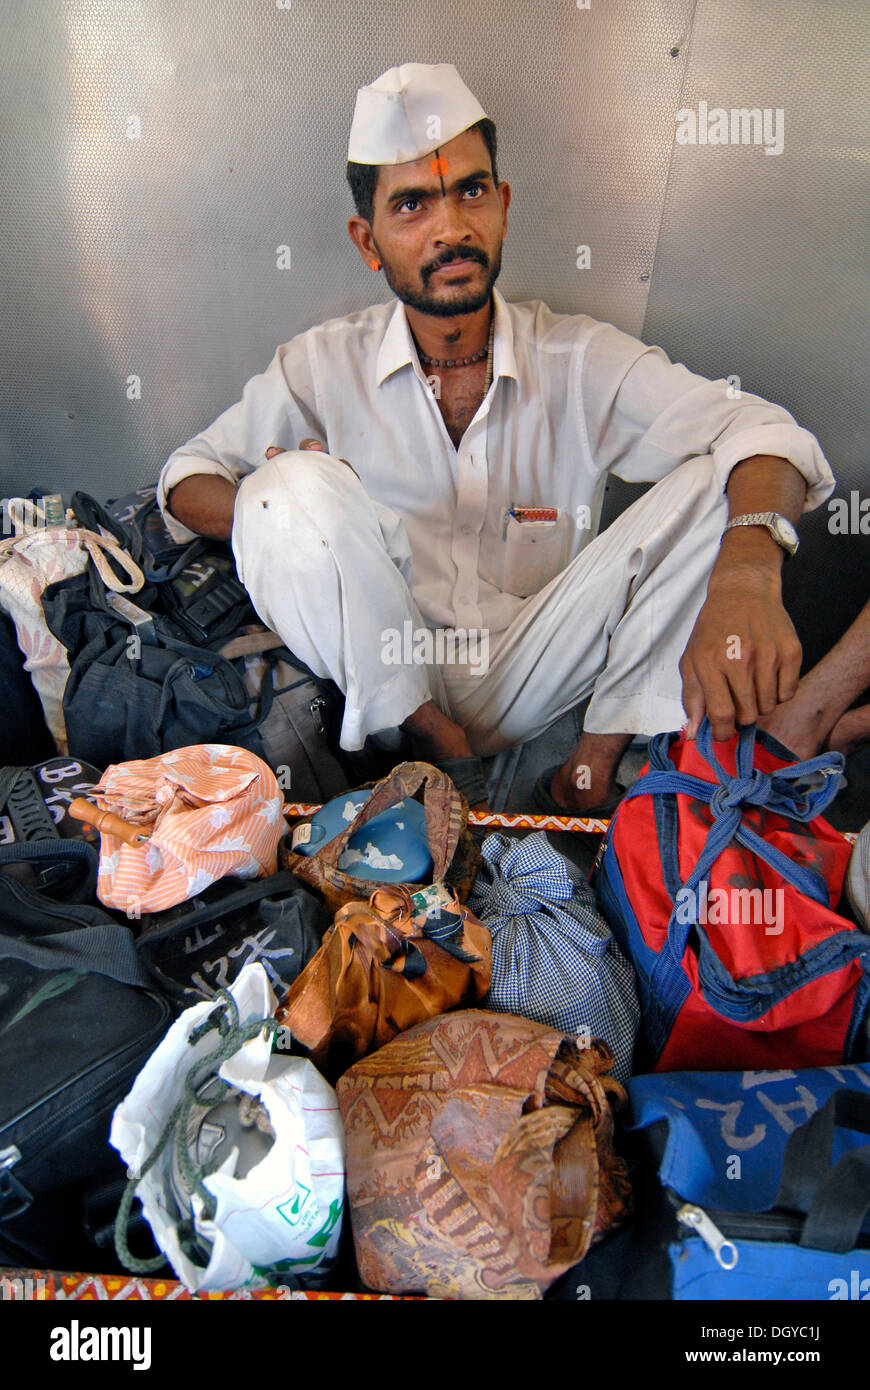 Dabba wallah or food deliverer with Dabbas or food containers in a local train, Mumbai, India, Asia Stock Photo